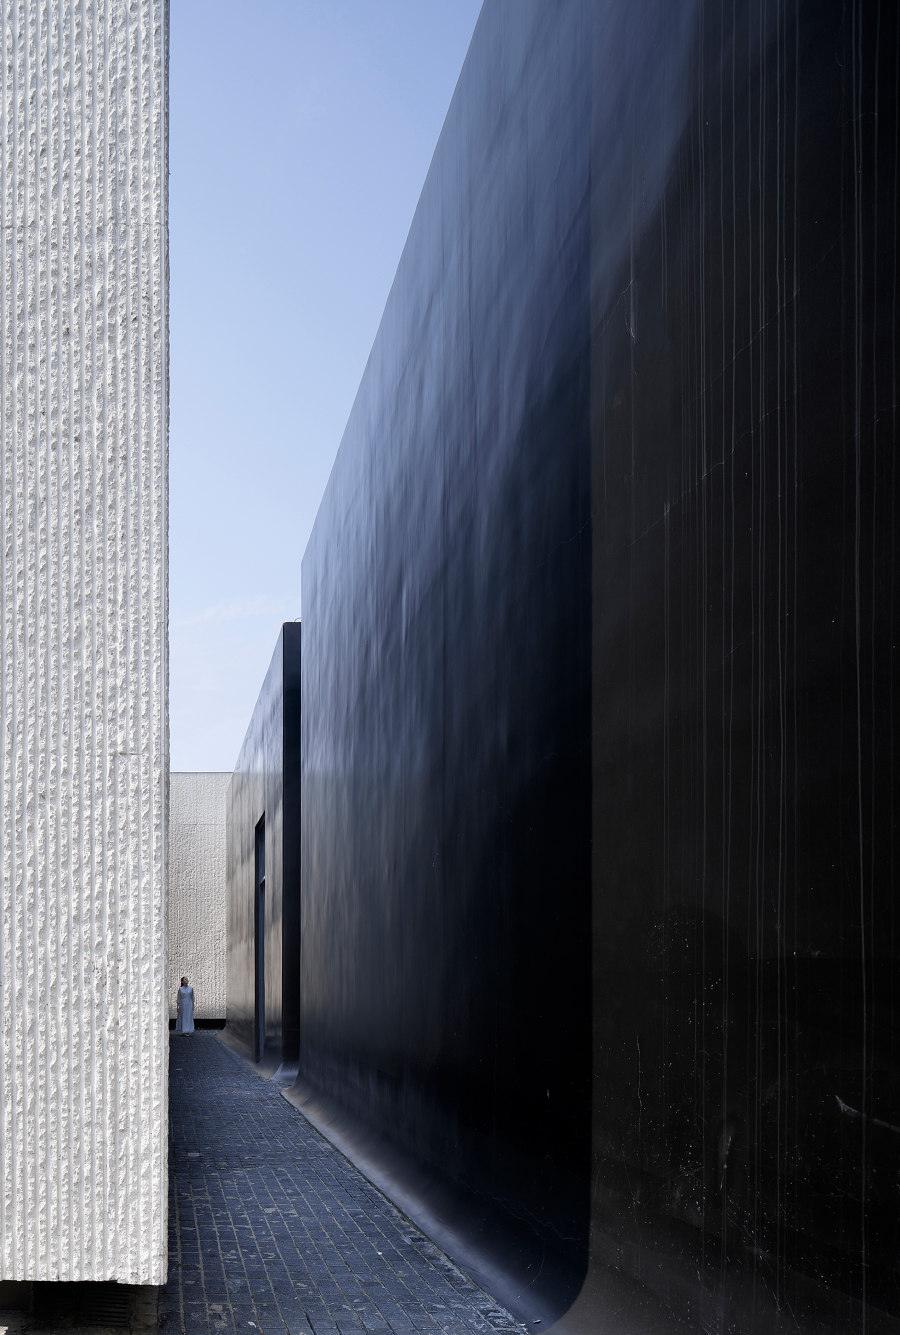 Shuyang Art Gallery de UAD | Architectural Design & Research Institute of Zhejiang University | Musées